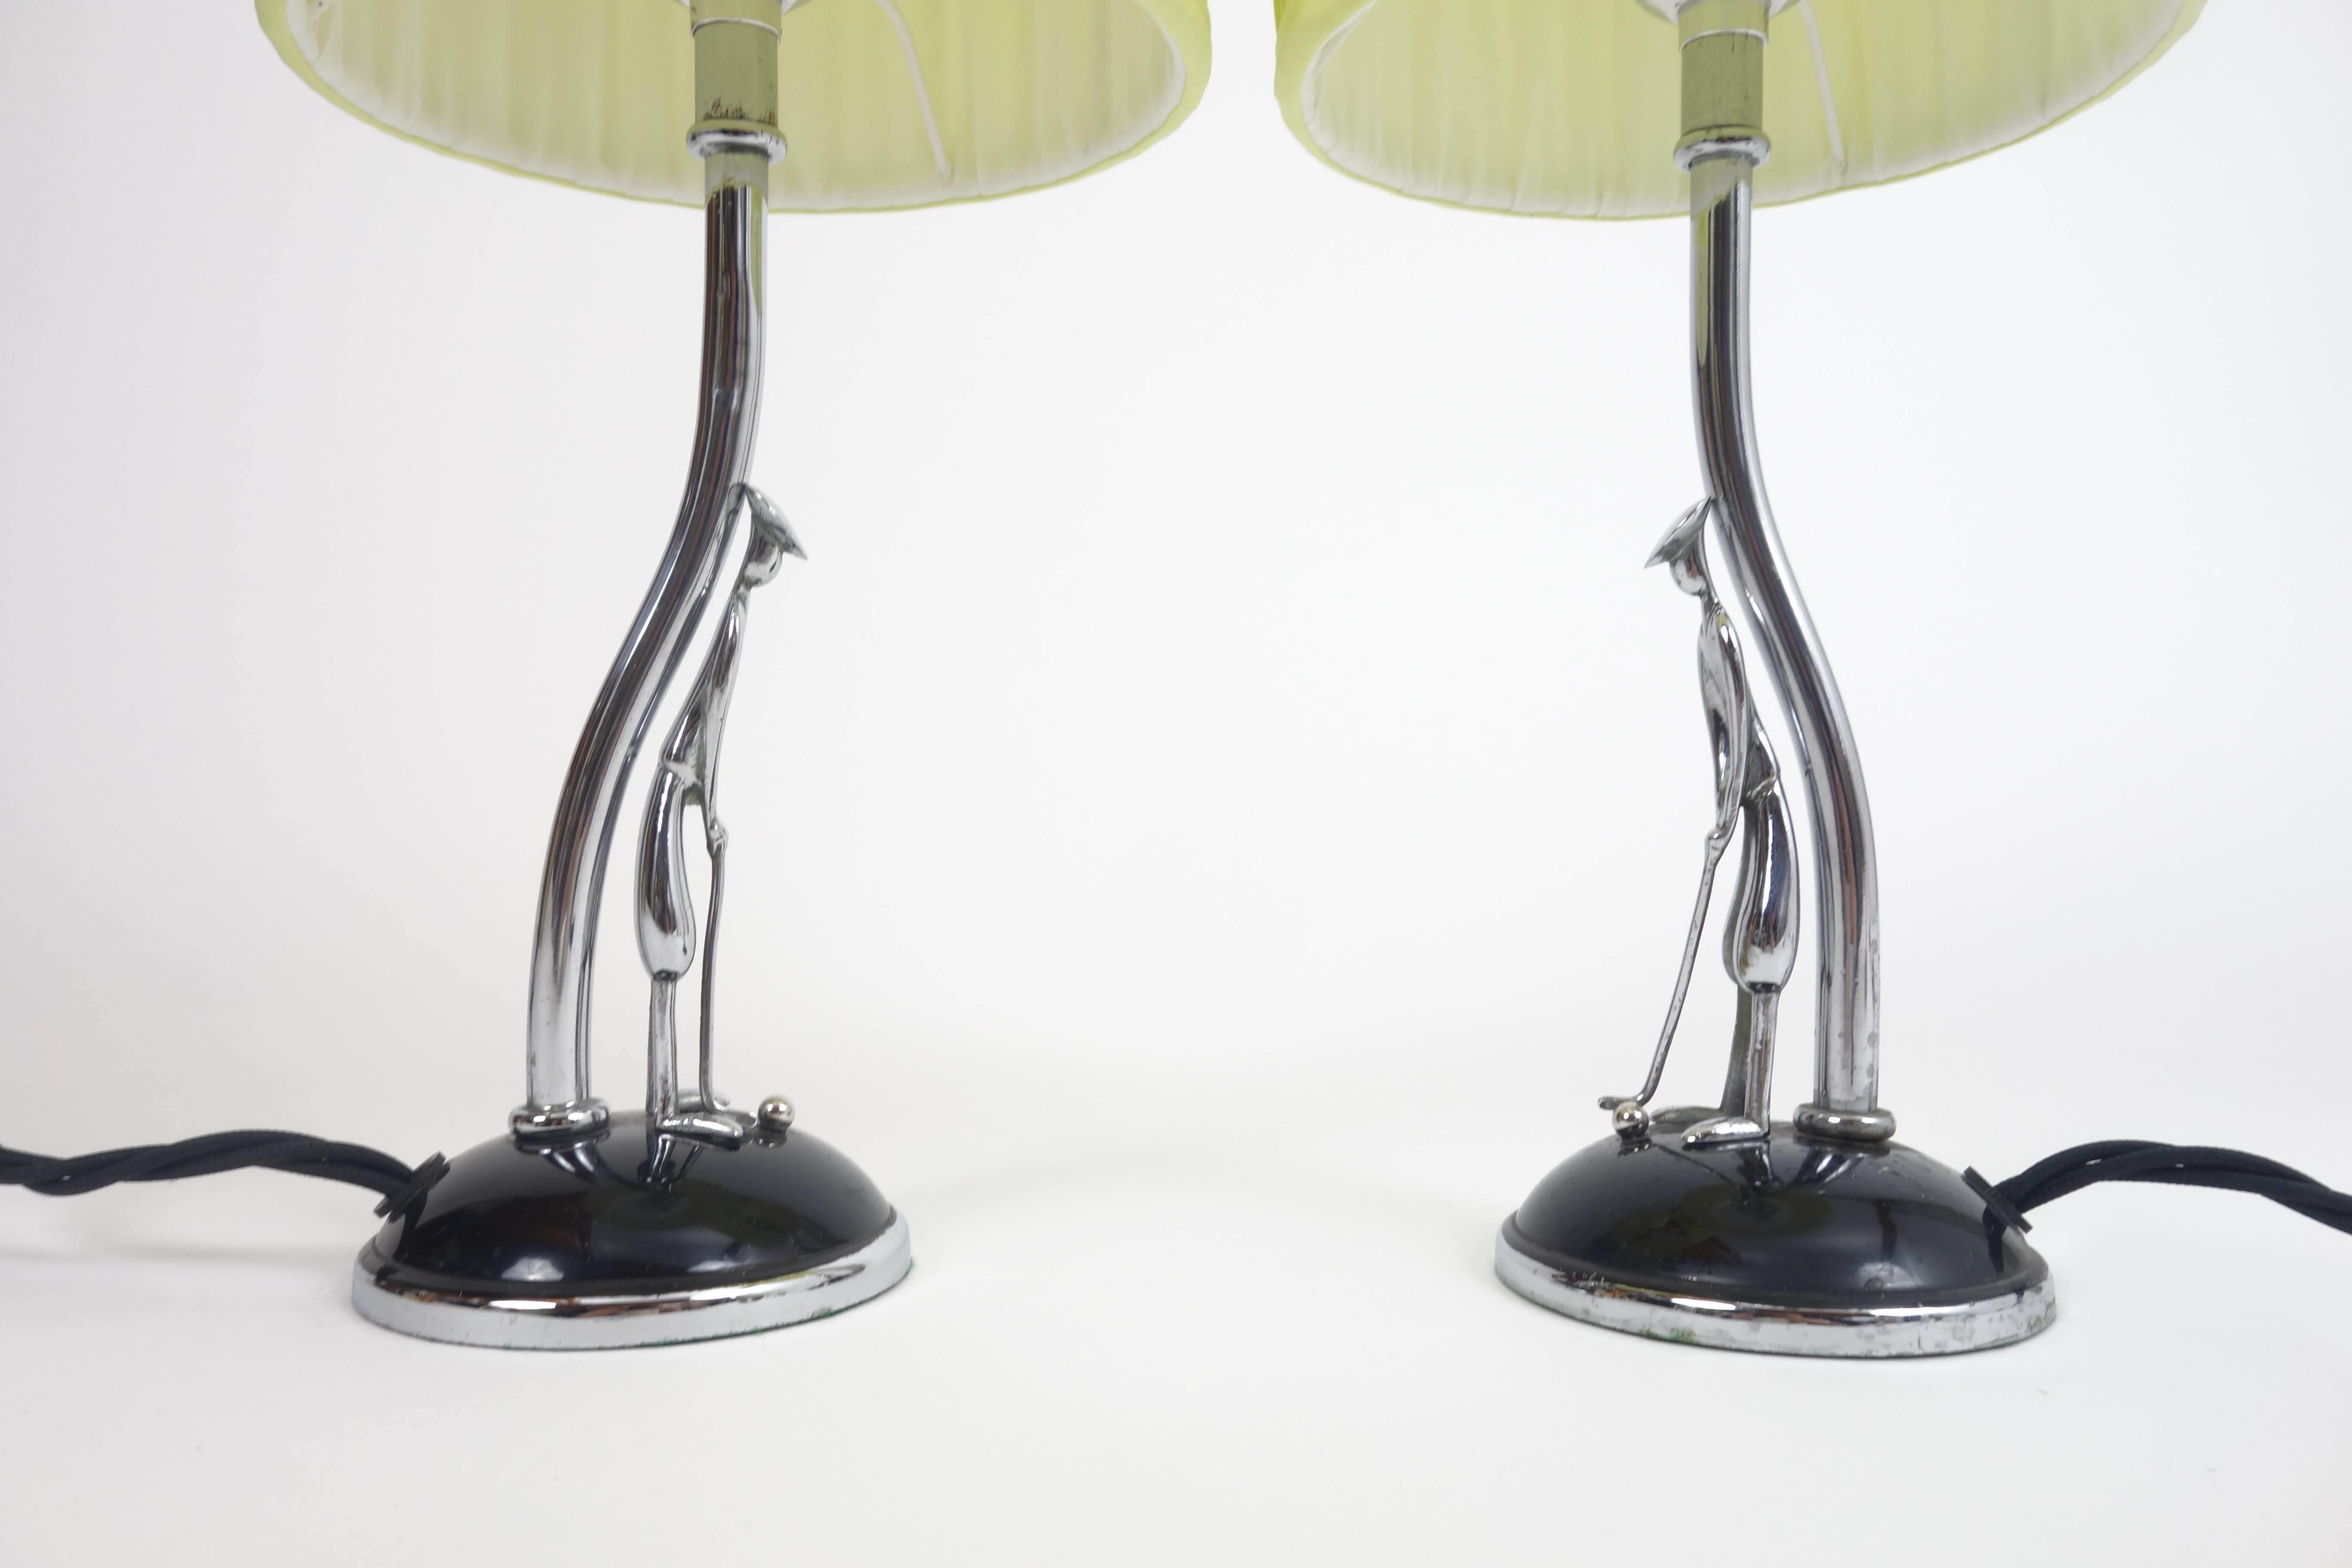 Hagenauer Table Lamps, Sculptured Nickel Stands with Yellow Lampshades In Good Condition For Sale In Perchtoldsdorf, AT